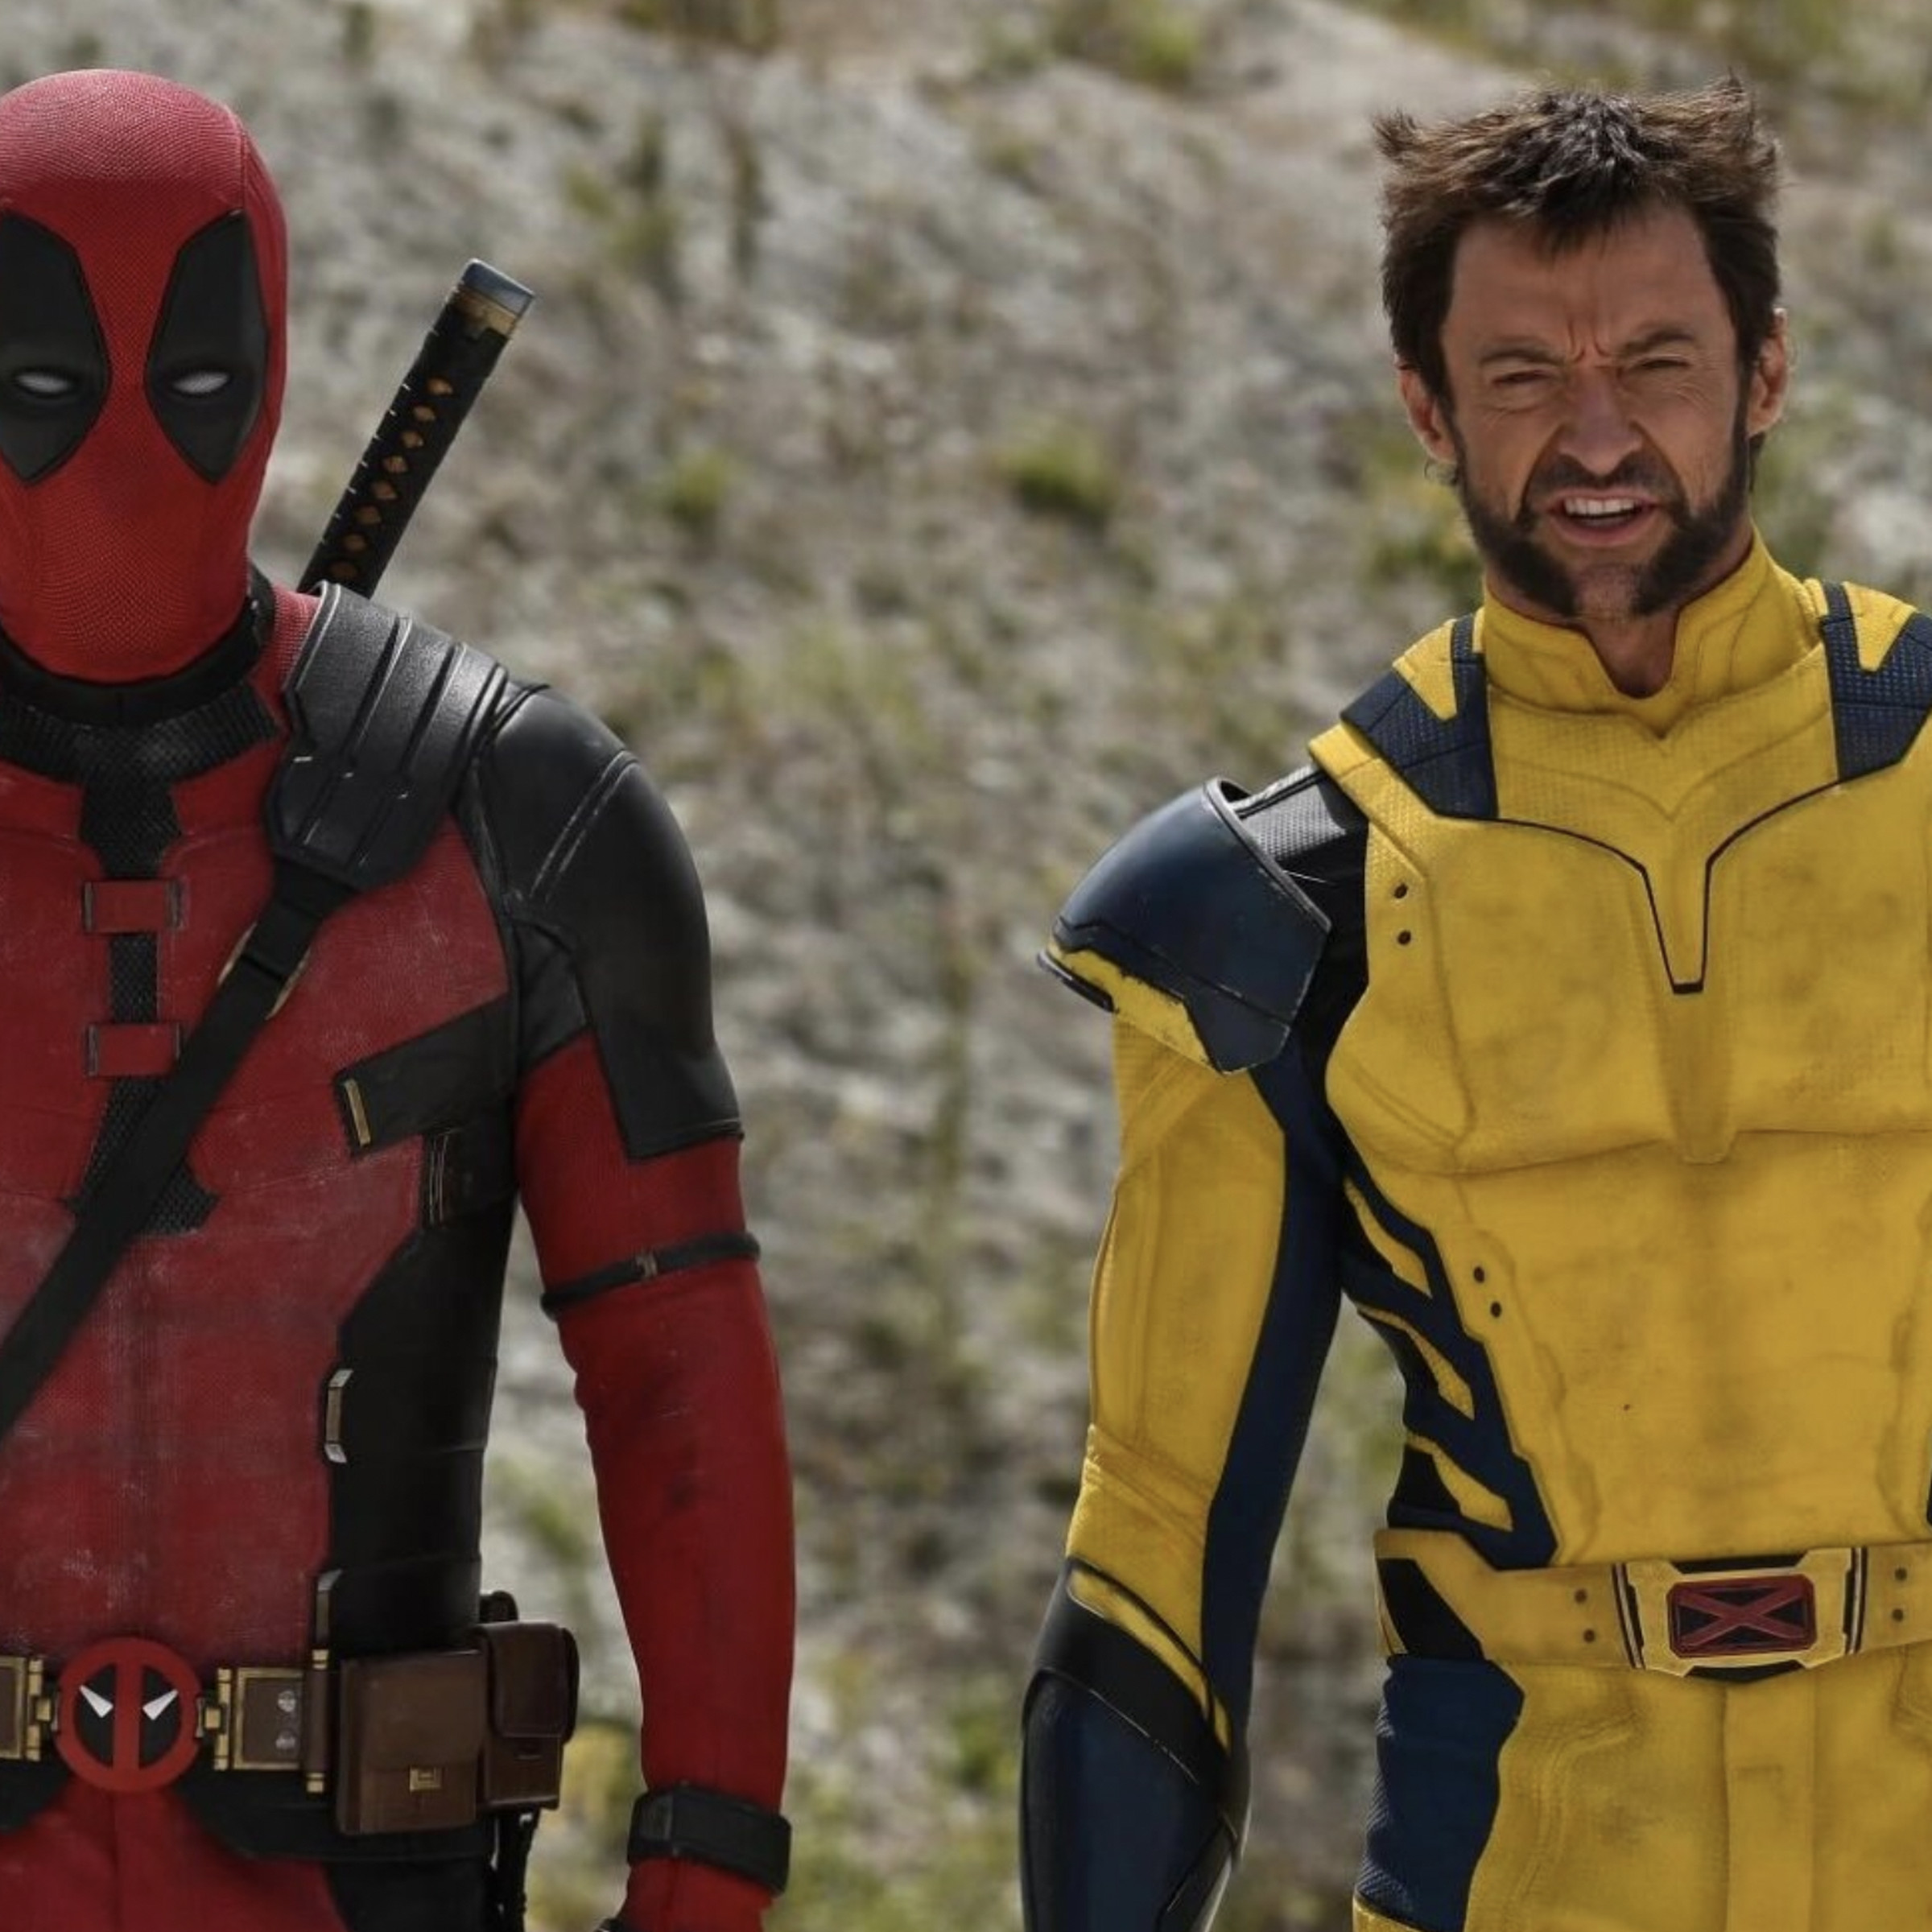 Deadpool on set next to Wolverine in costume.